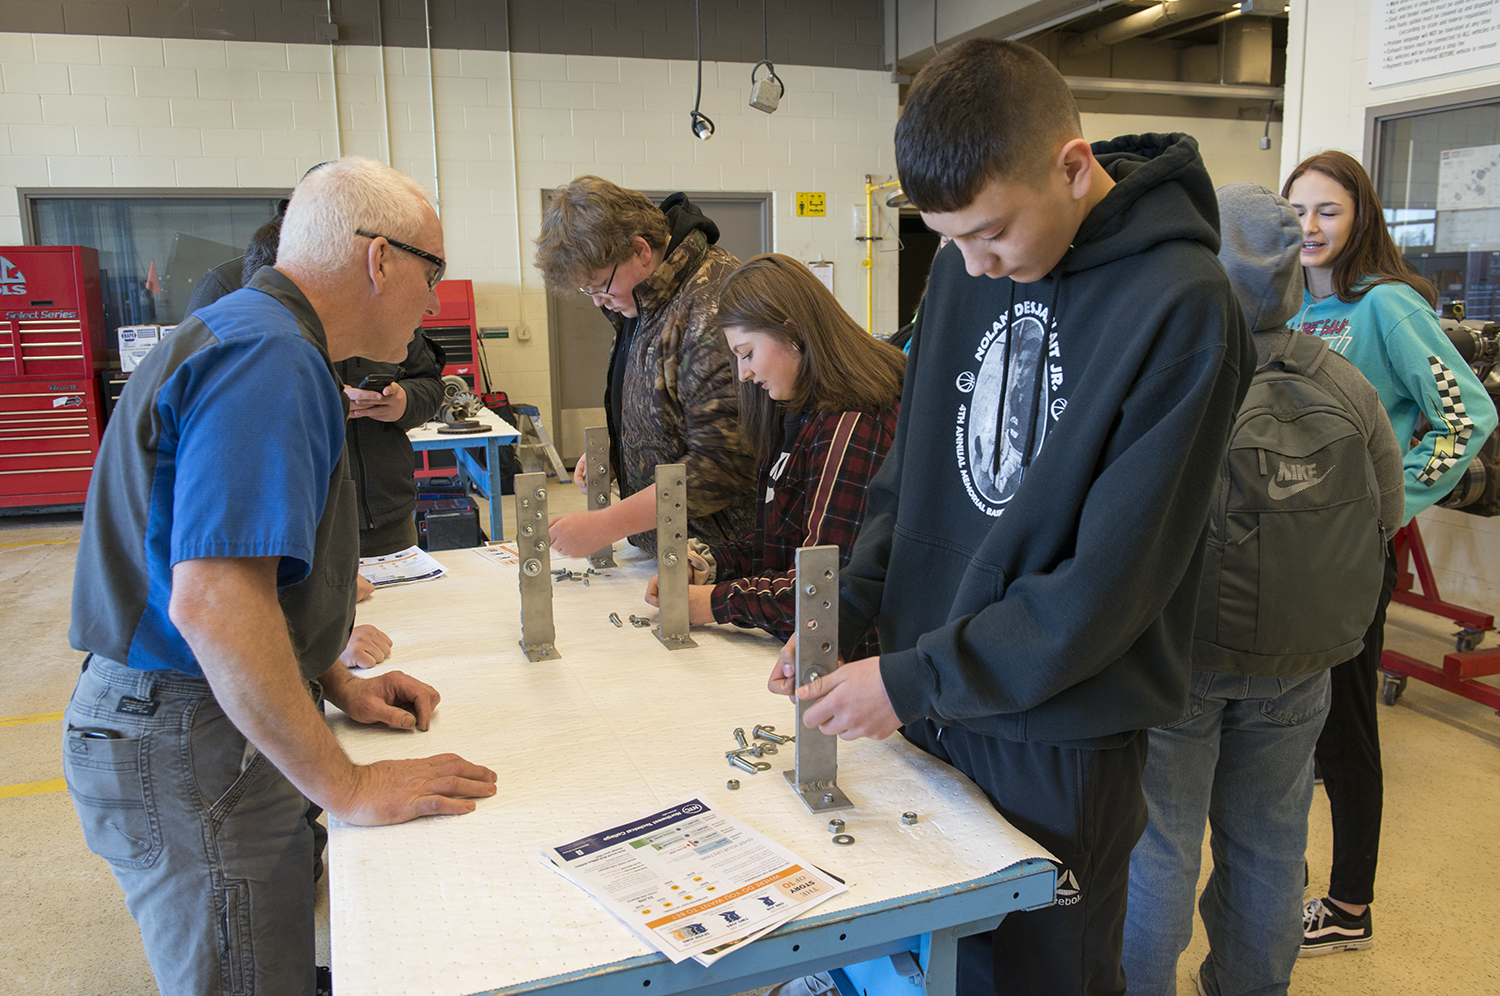 Ninth graders from Blackduck High School visiting NTC exploring automotive career pathways in the automotive lab.